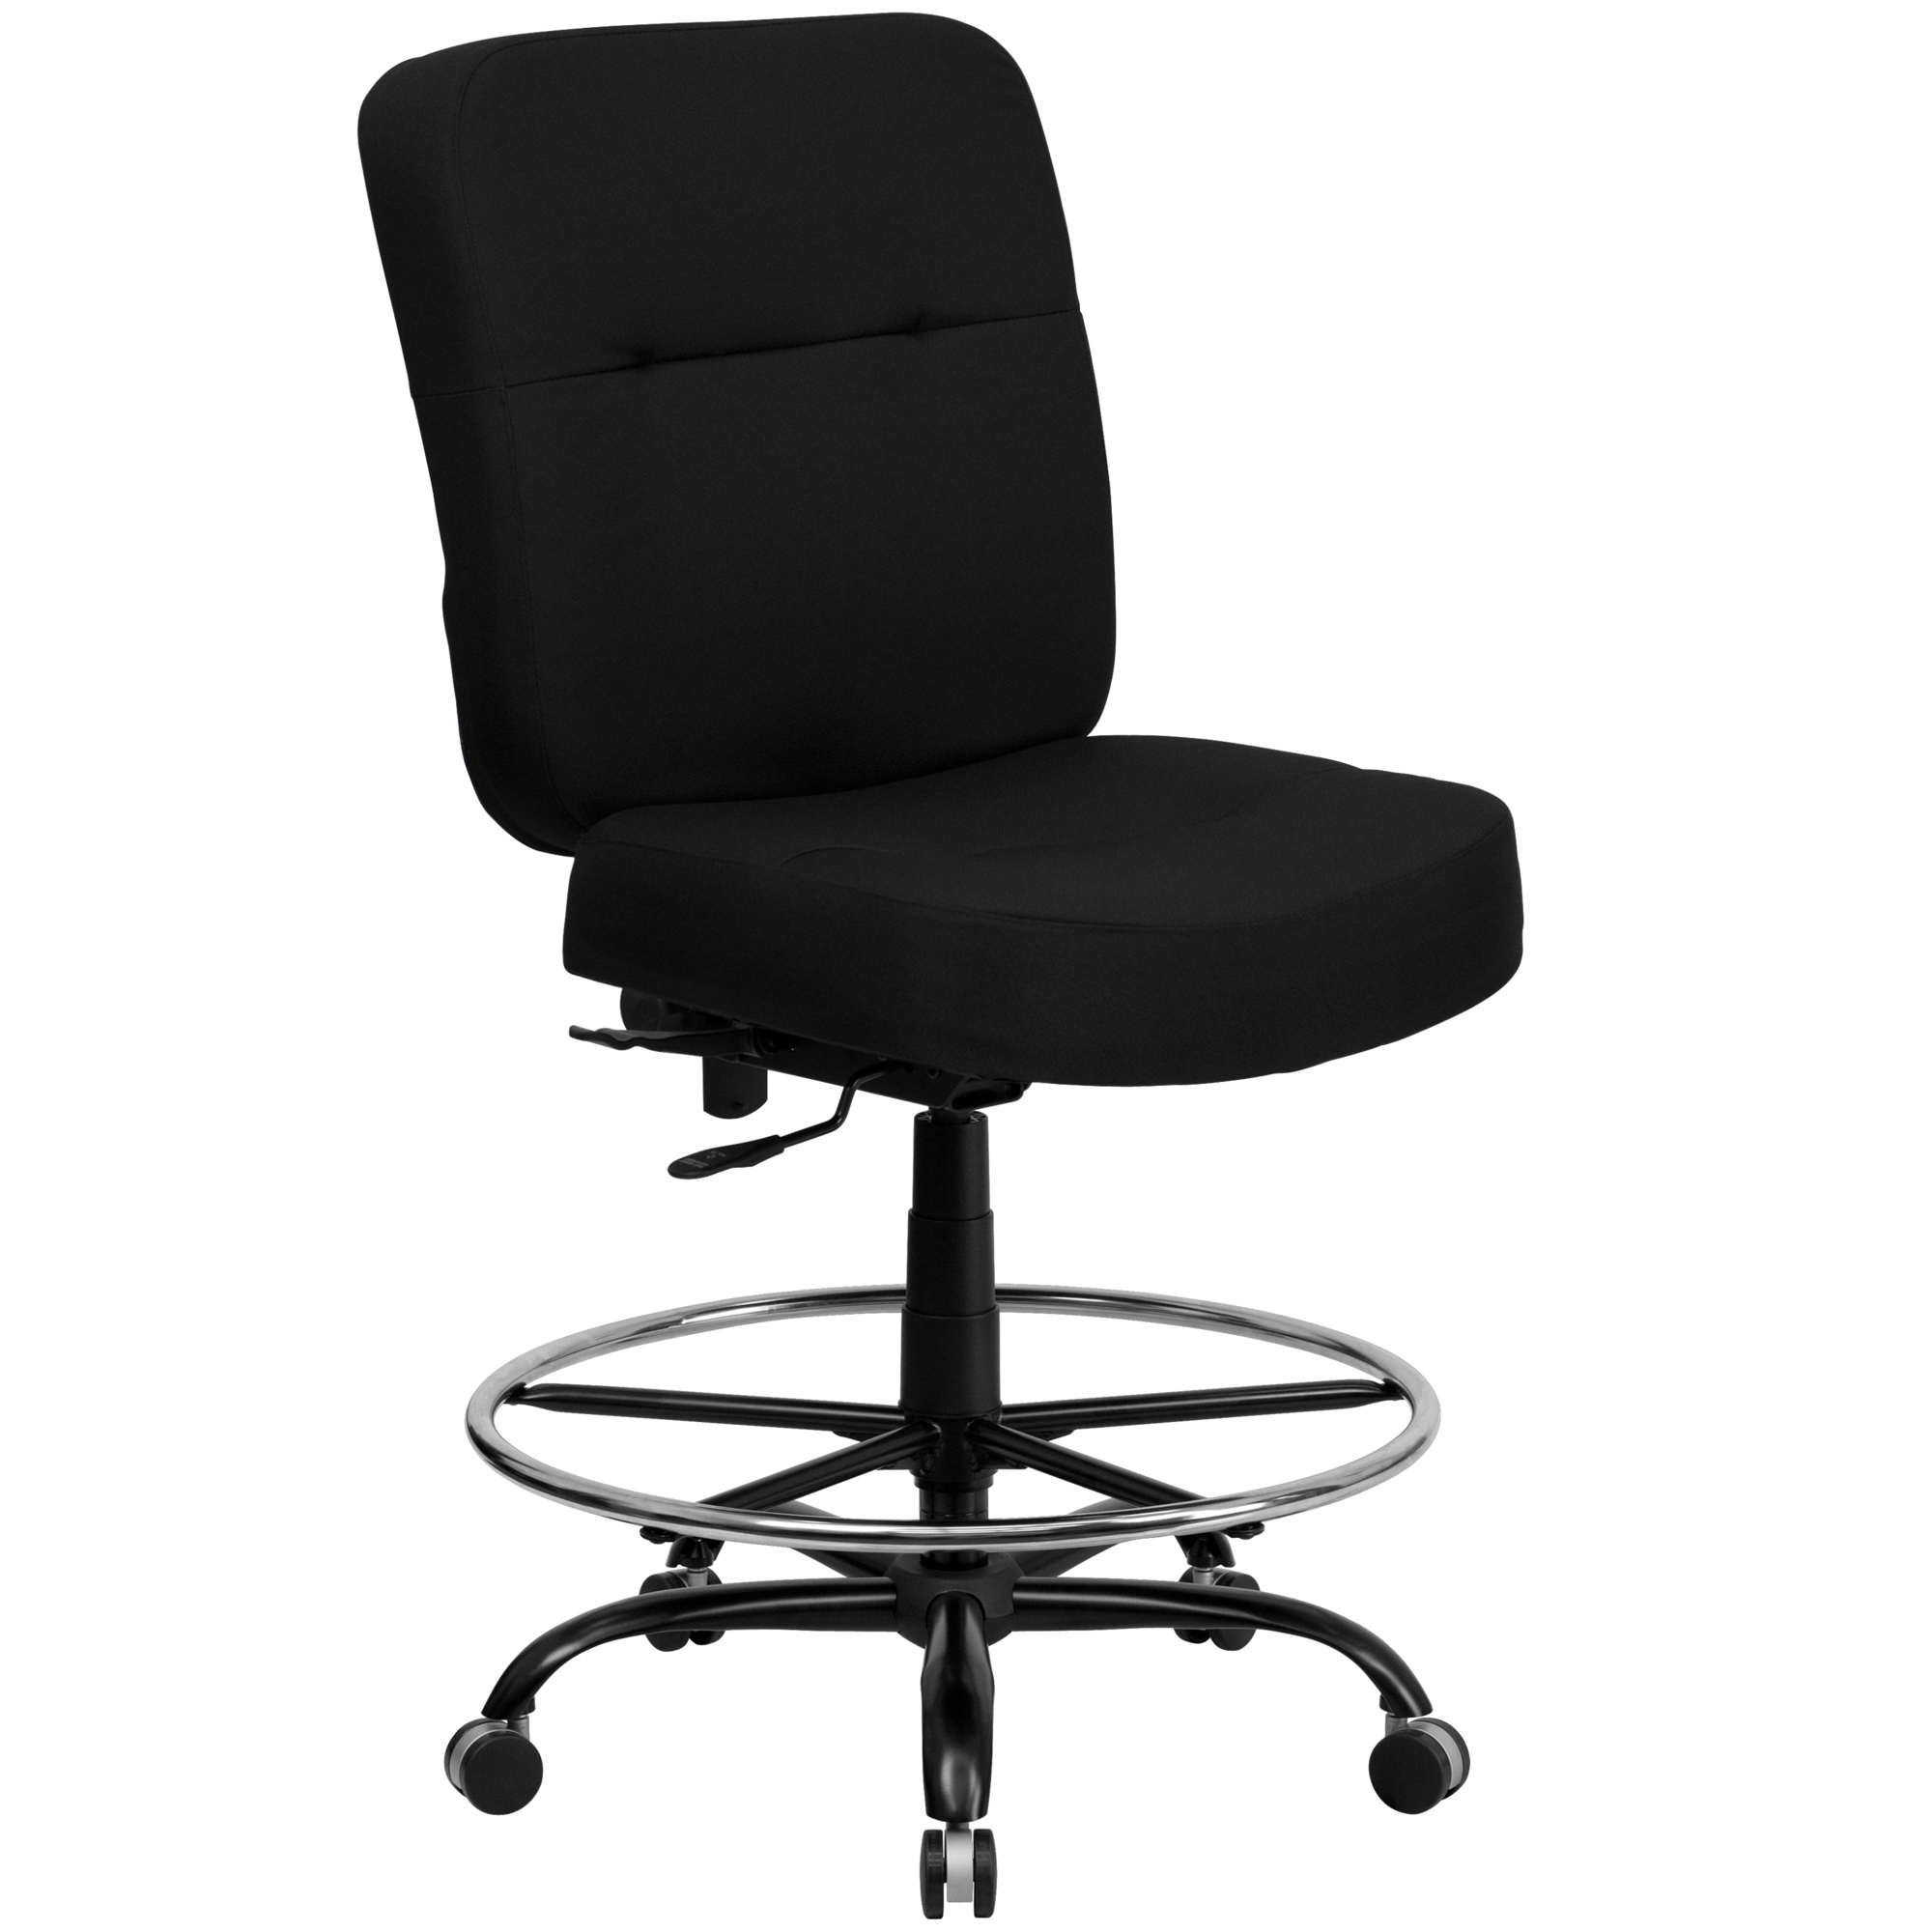 Flash Furniture, 400 lb. Rated Black Fabric Drafting Chair, Primary Color Black, Included (qty.) 1, Model WL735SYGBKD